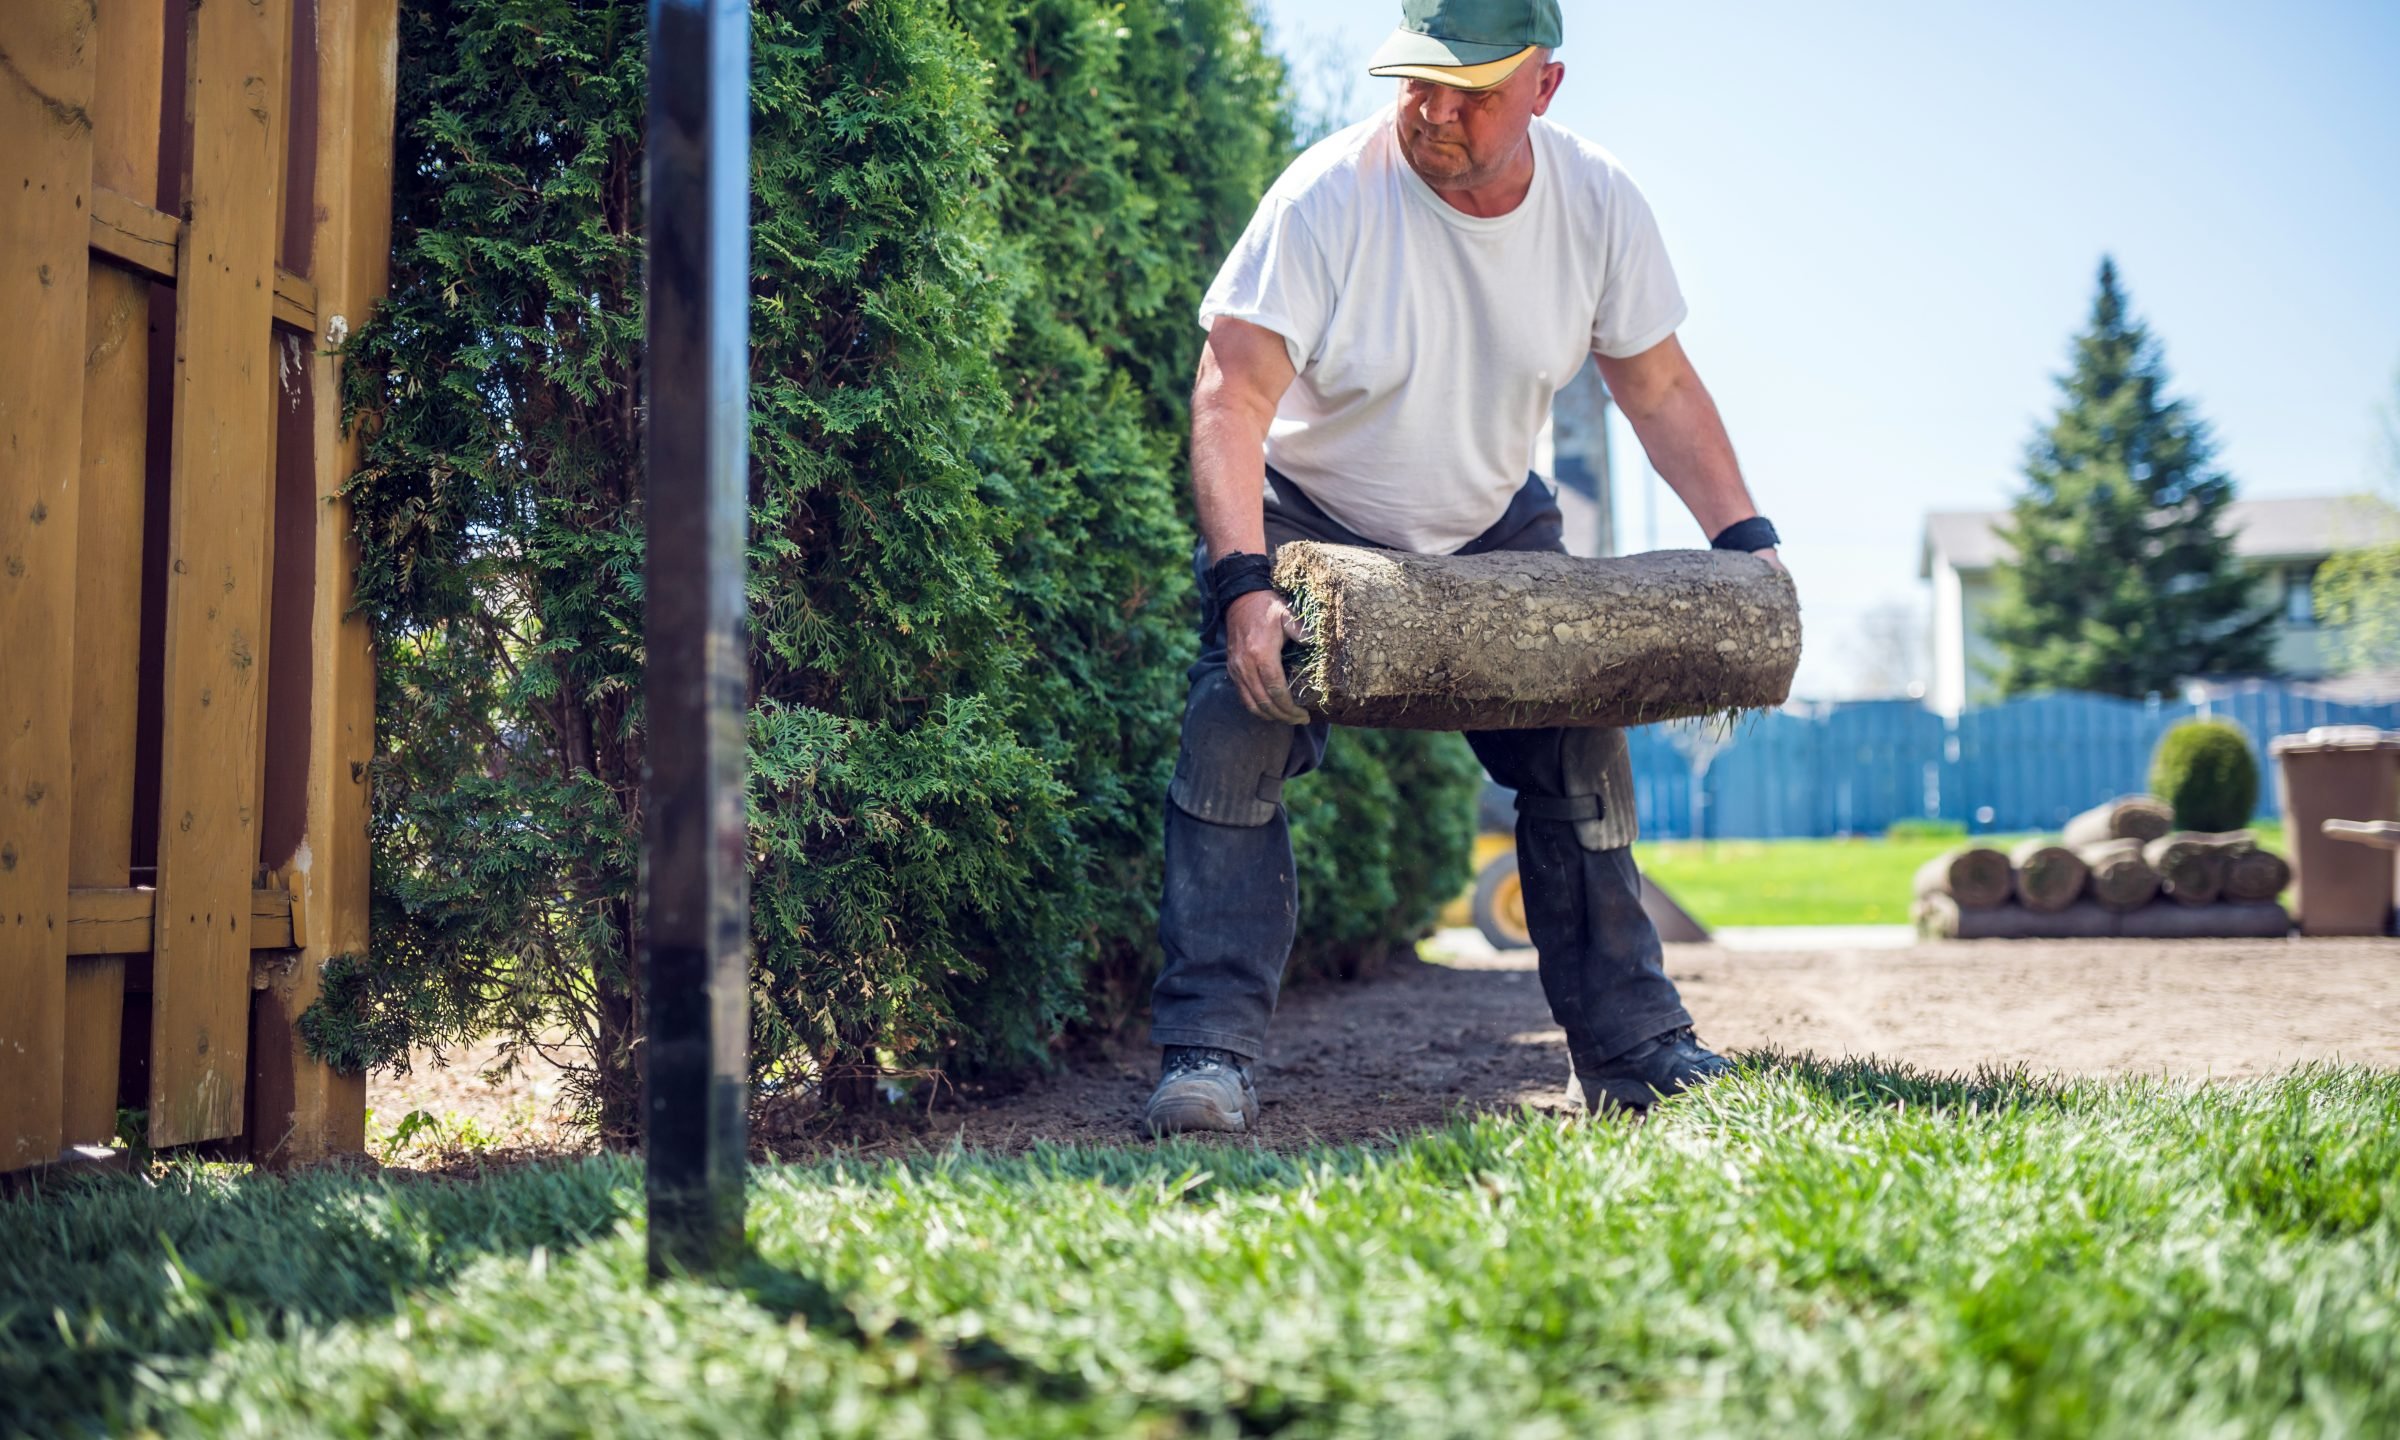 A Landscaping Or Lawn Care Business, Average Landscaping Pay Per Hour